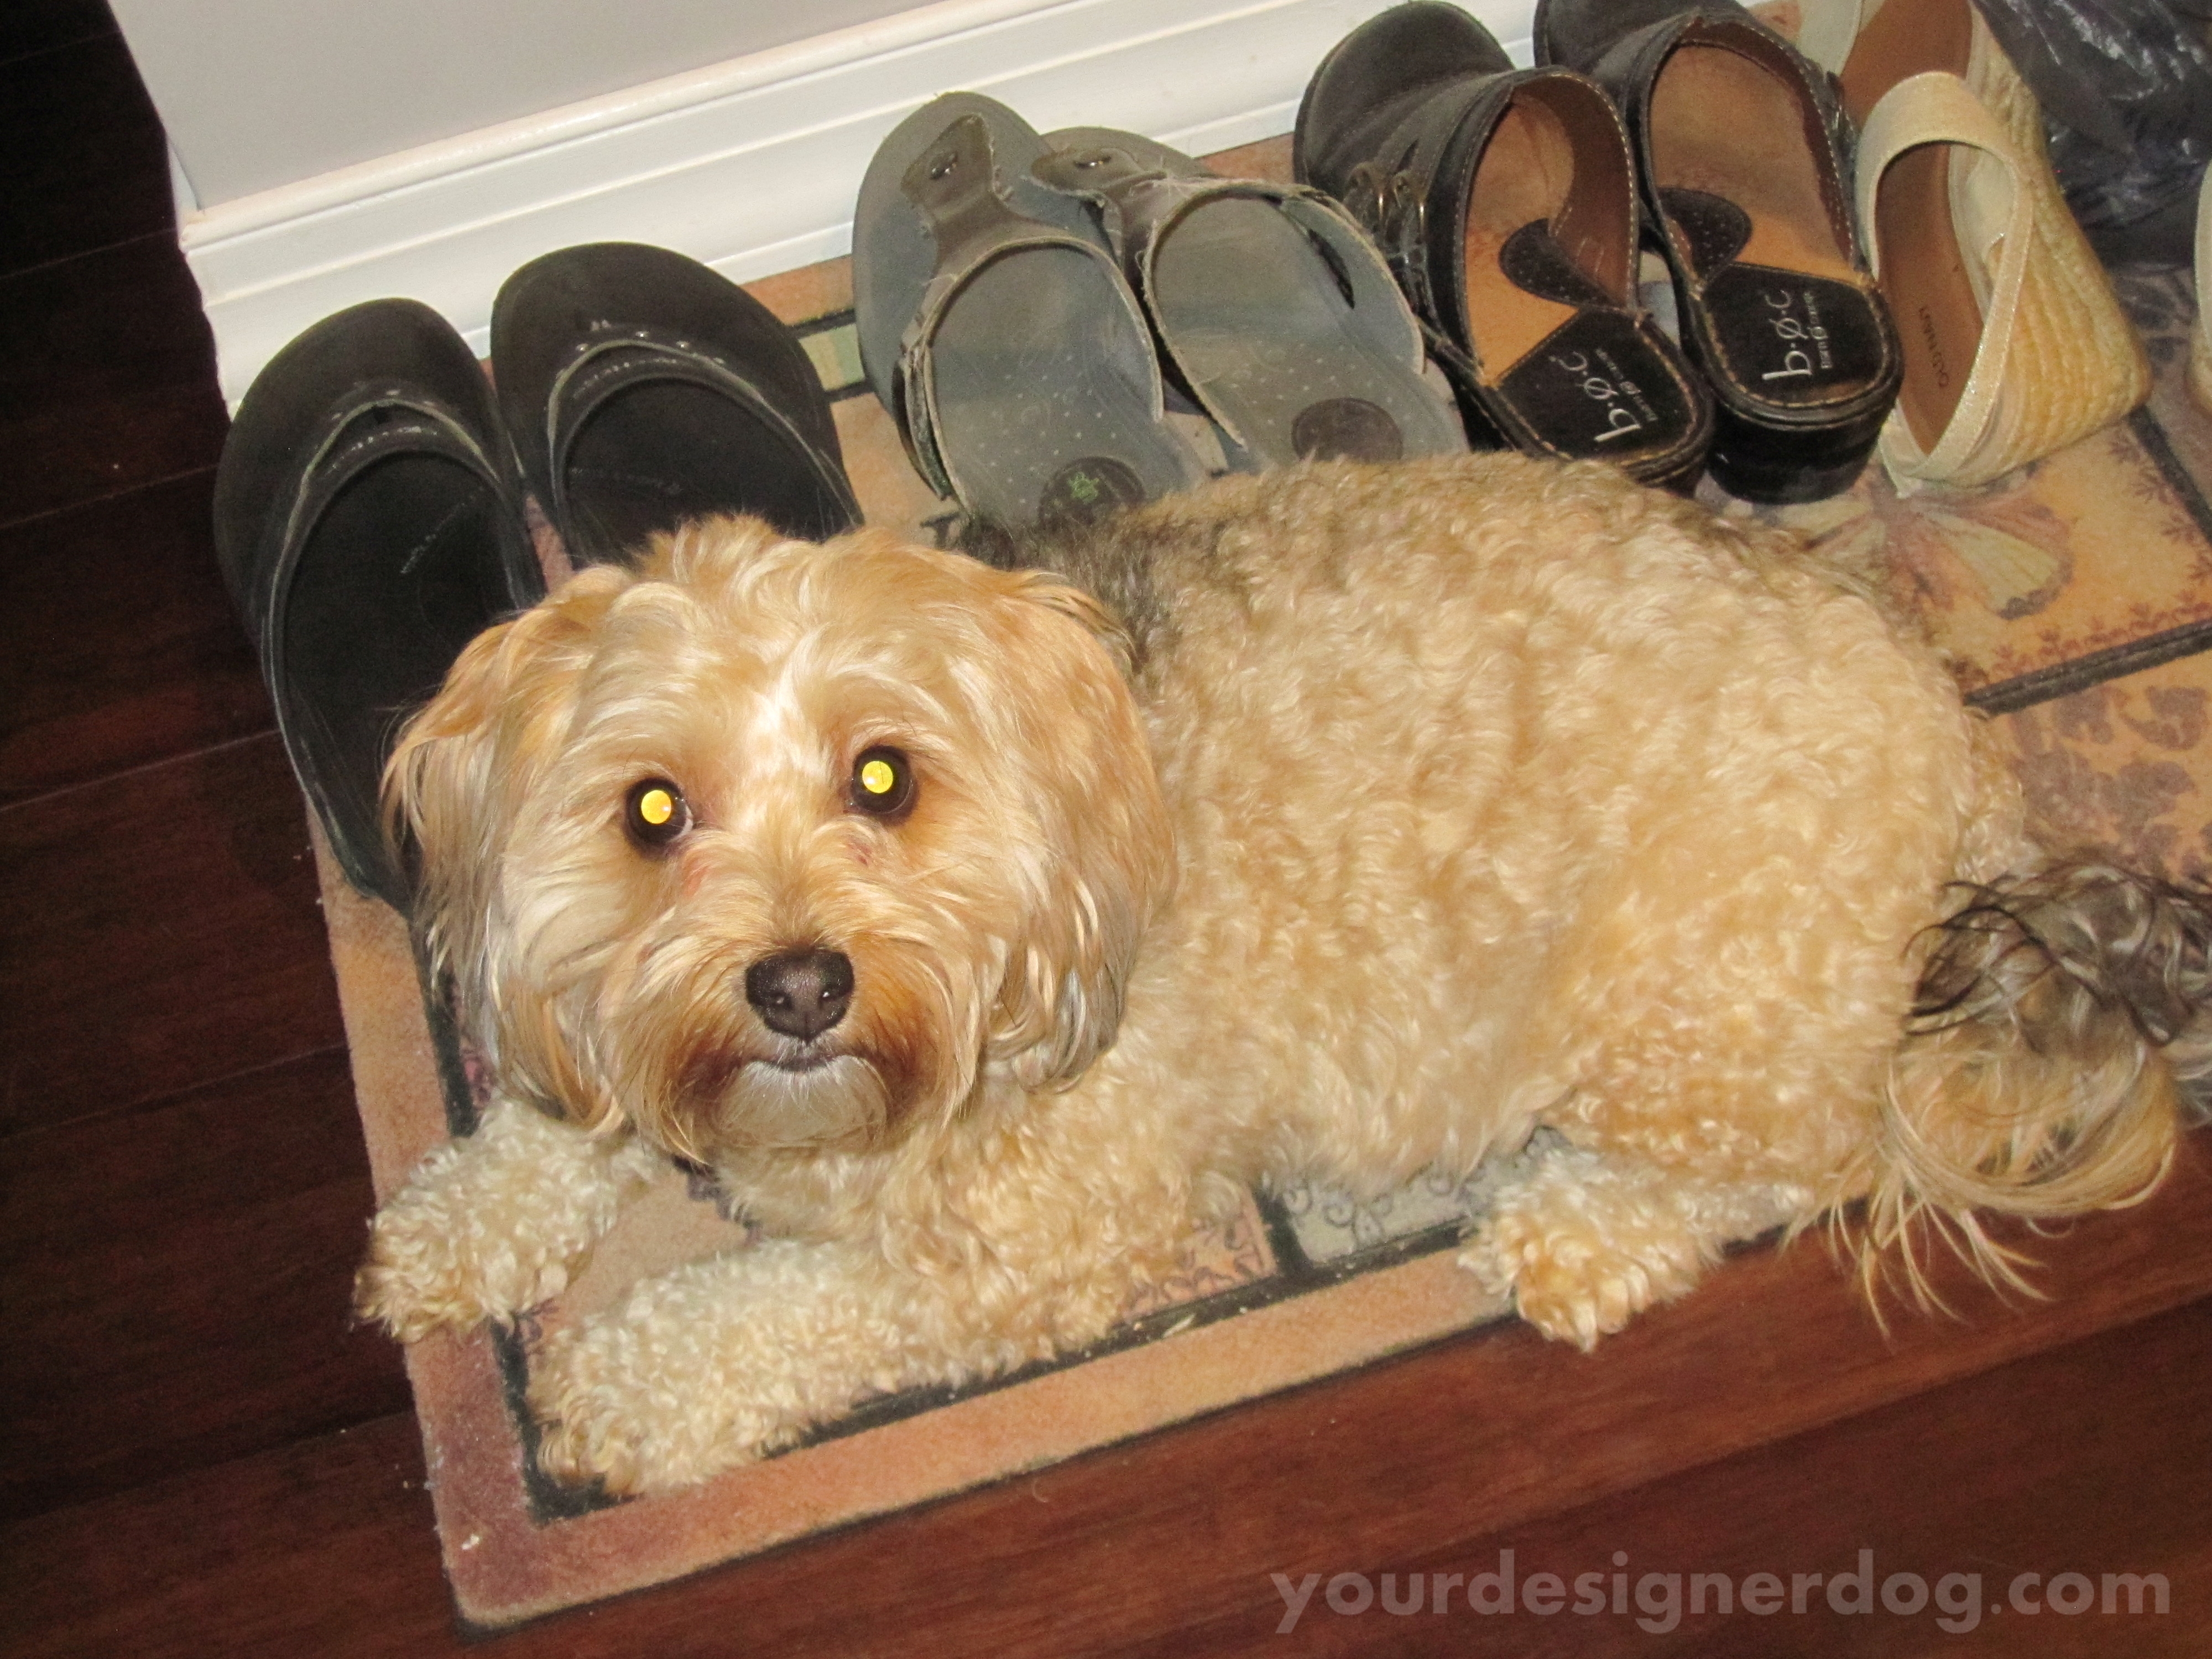 dogs, designer dogs, yorkipoo, yorkie poo, shoes, guarding